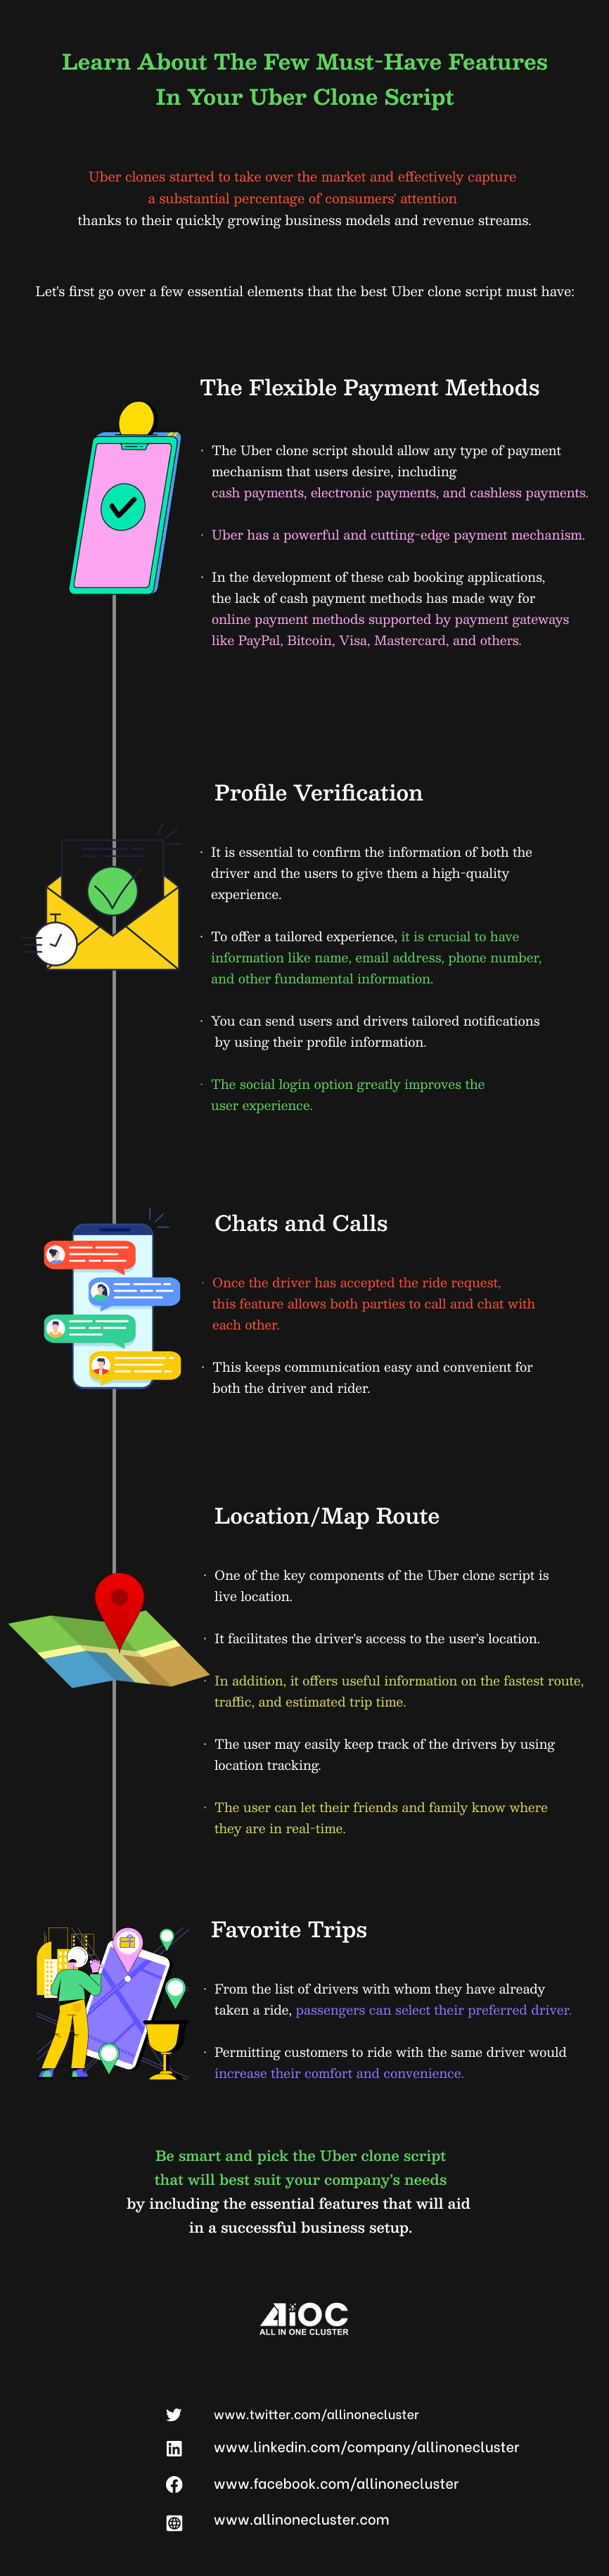 Features in Your Uber Clone Script - Infographic